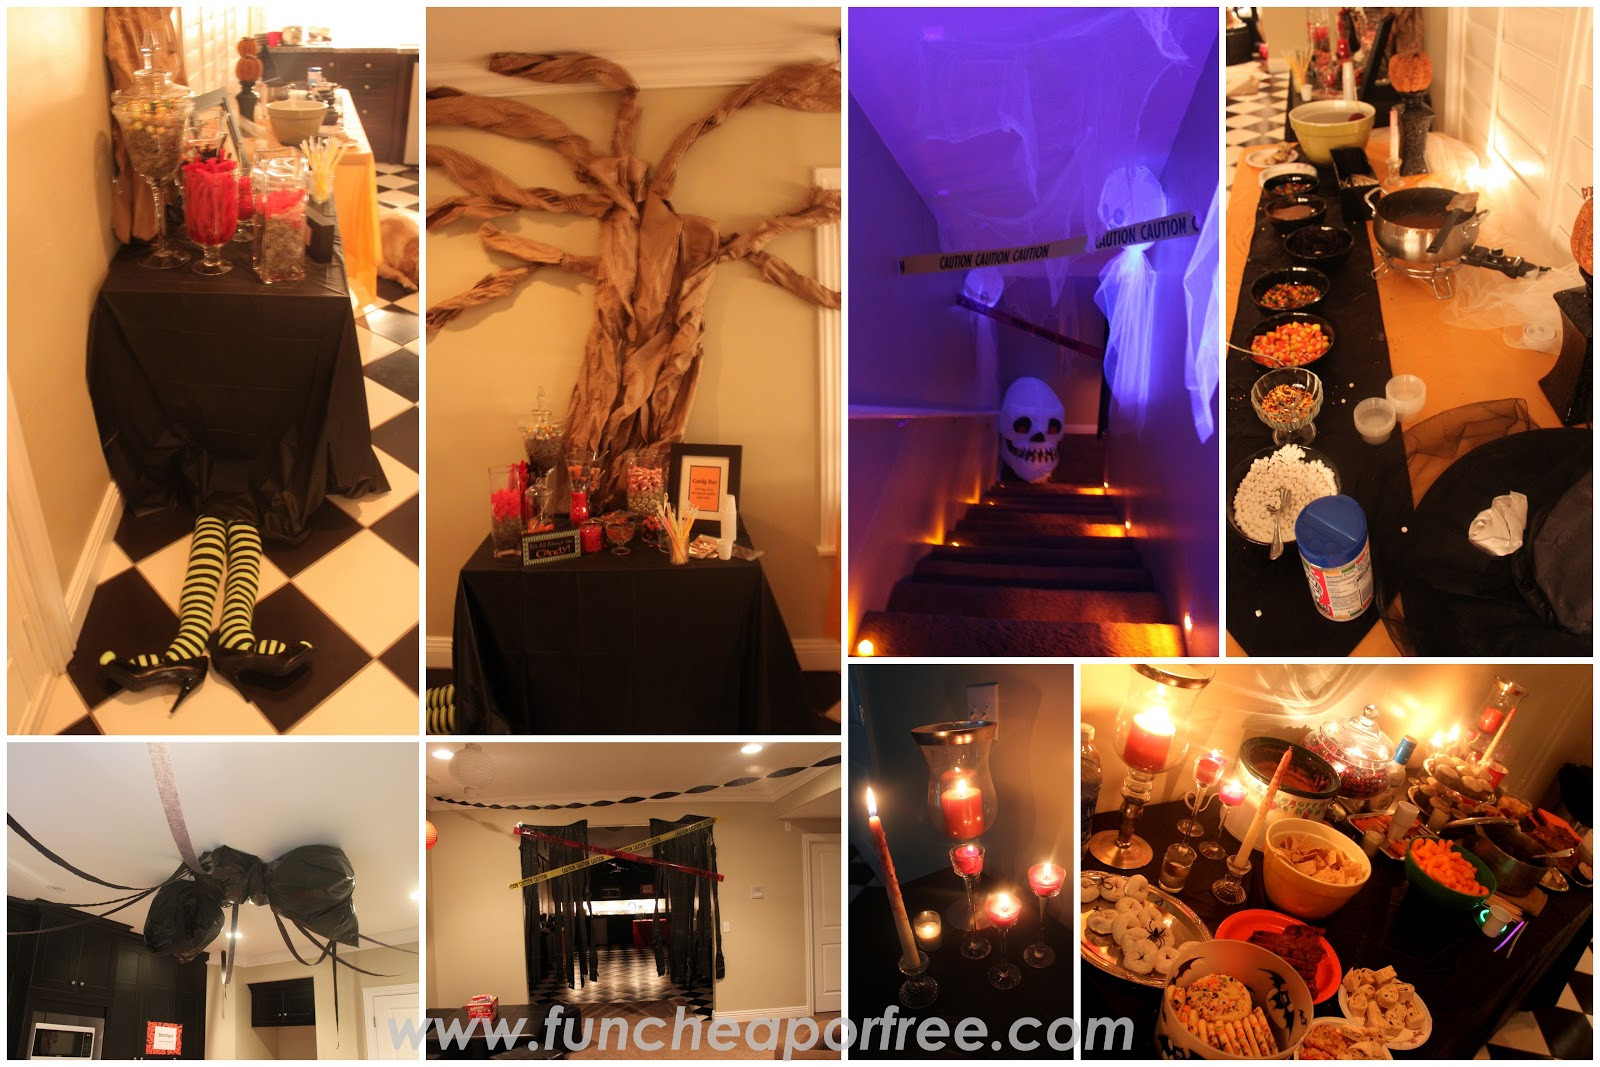 Halloween Costumes Party Ideas
 Halloween Party Ideas fun cheap or free style Fun